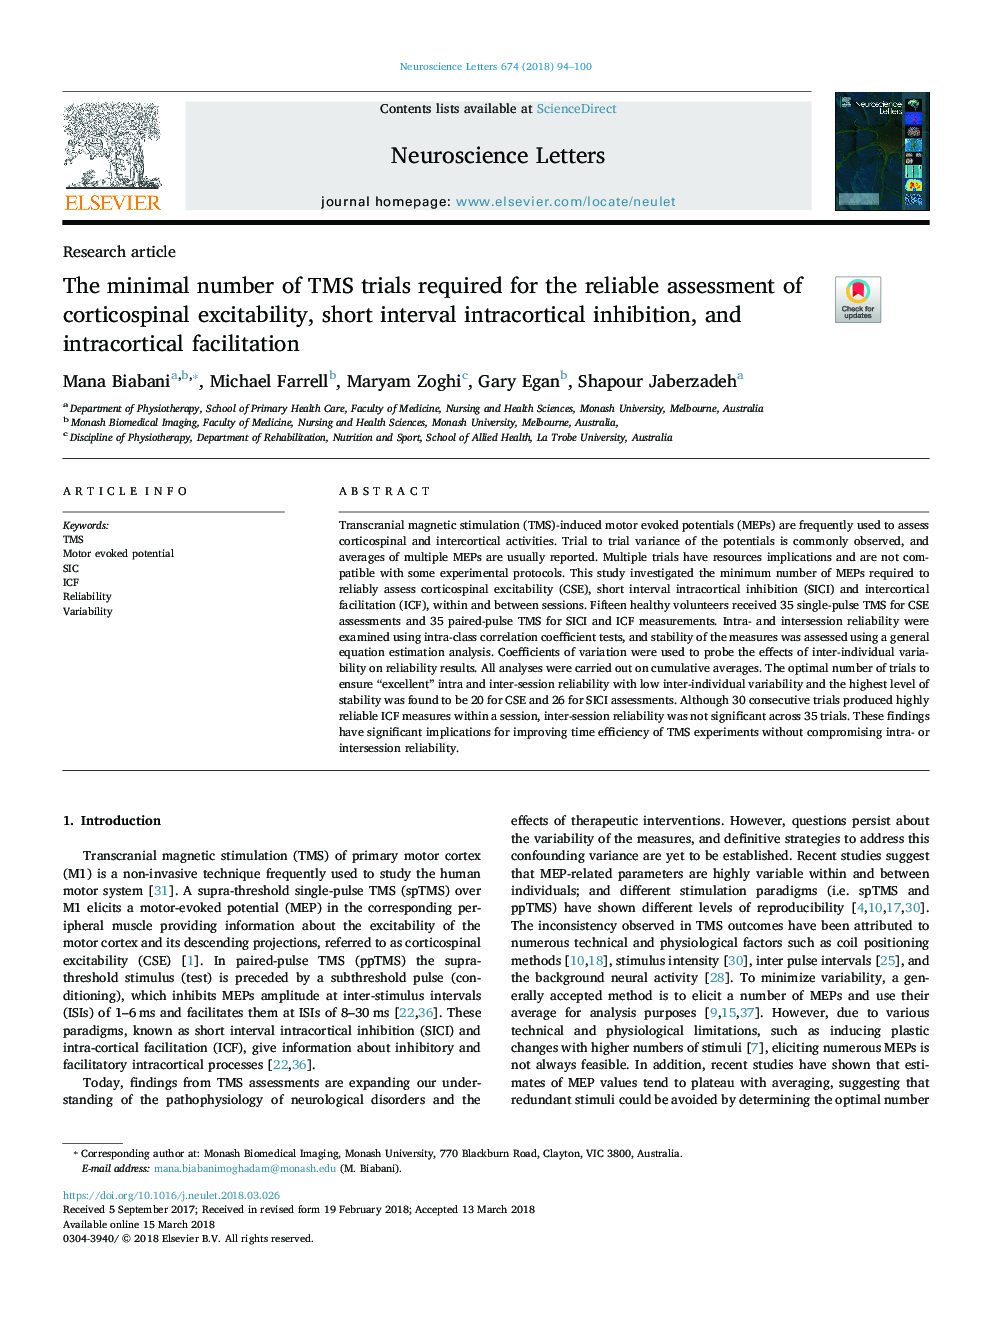 The minimal number of TMS trials required for the reliable assessment of corticospinal excitability, short interval intracortical inhibition, and intracortical facilitation